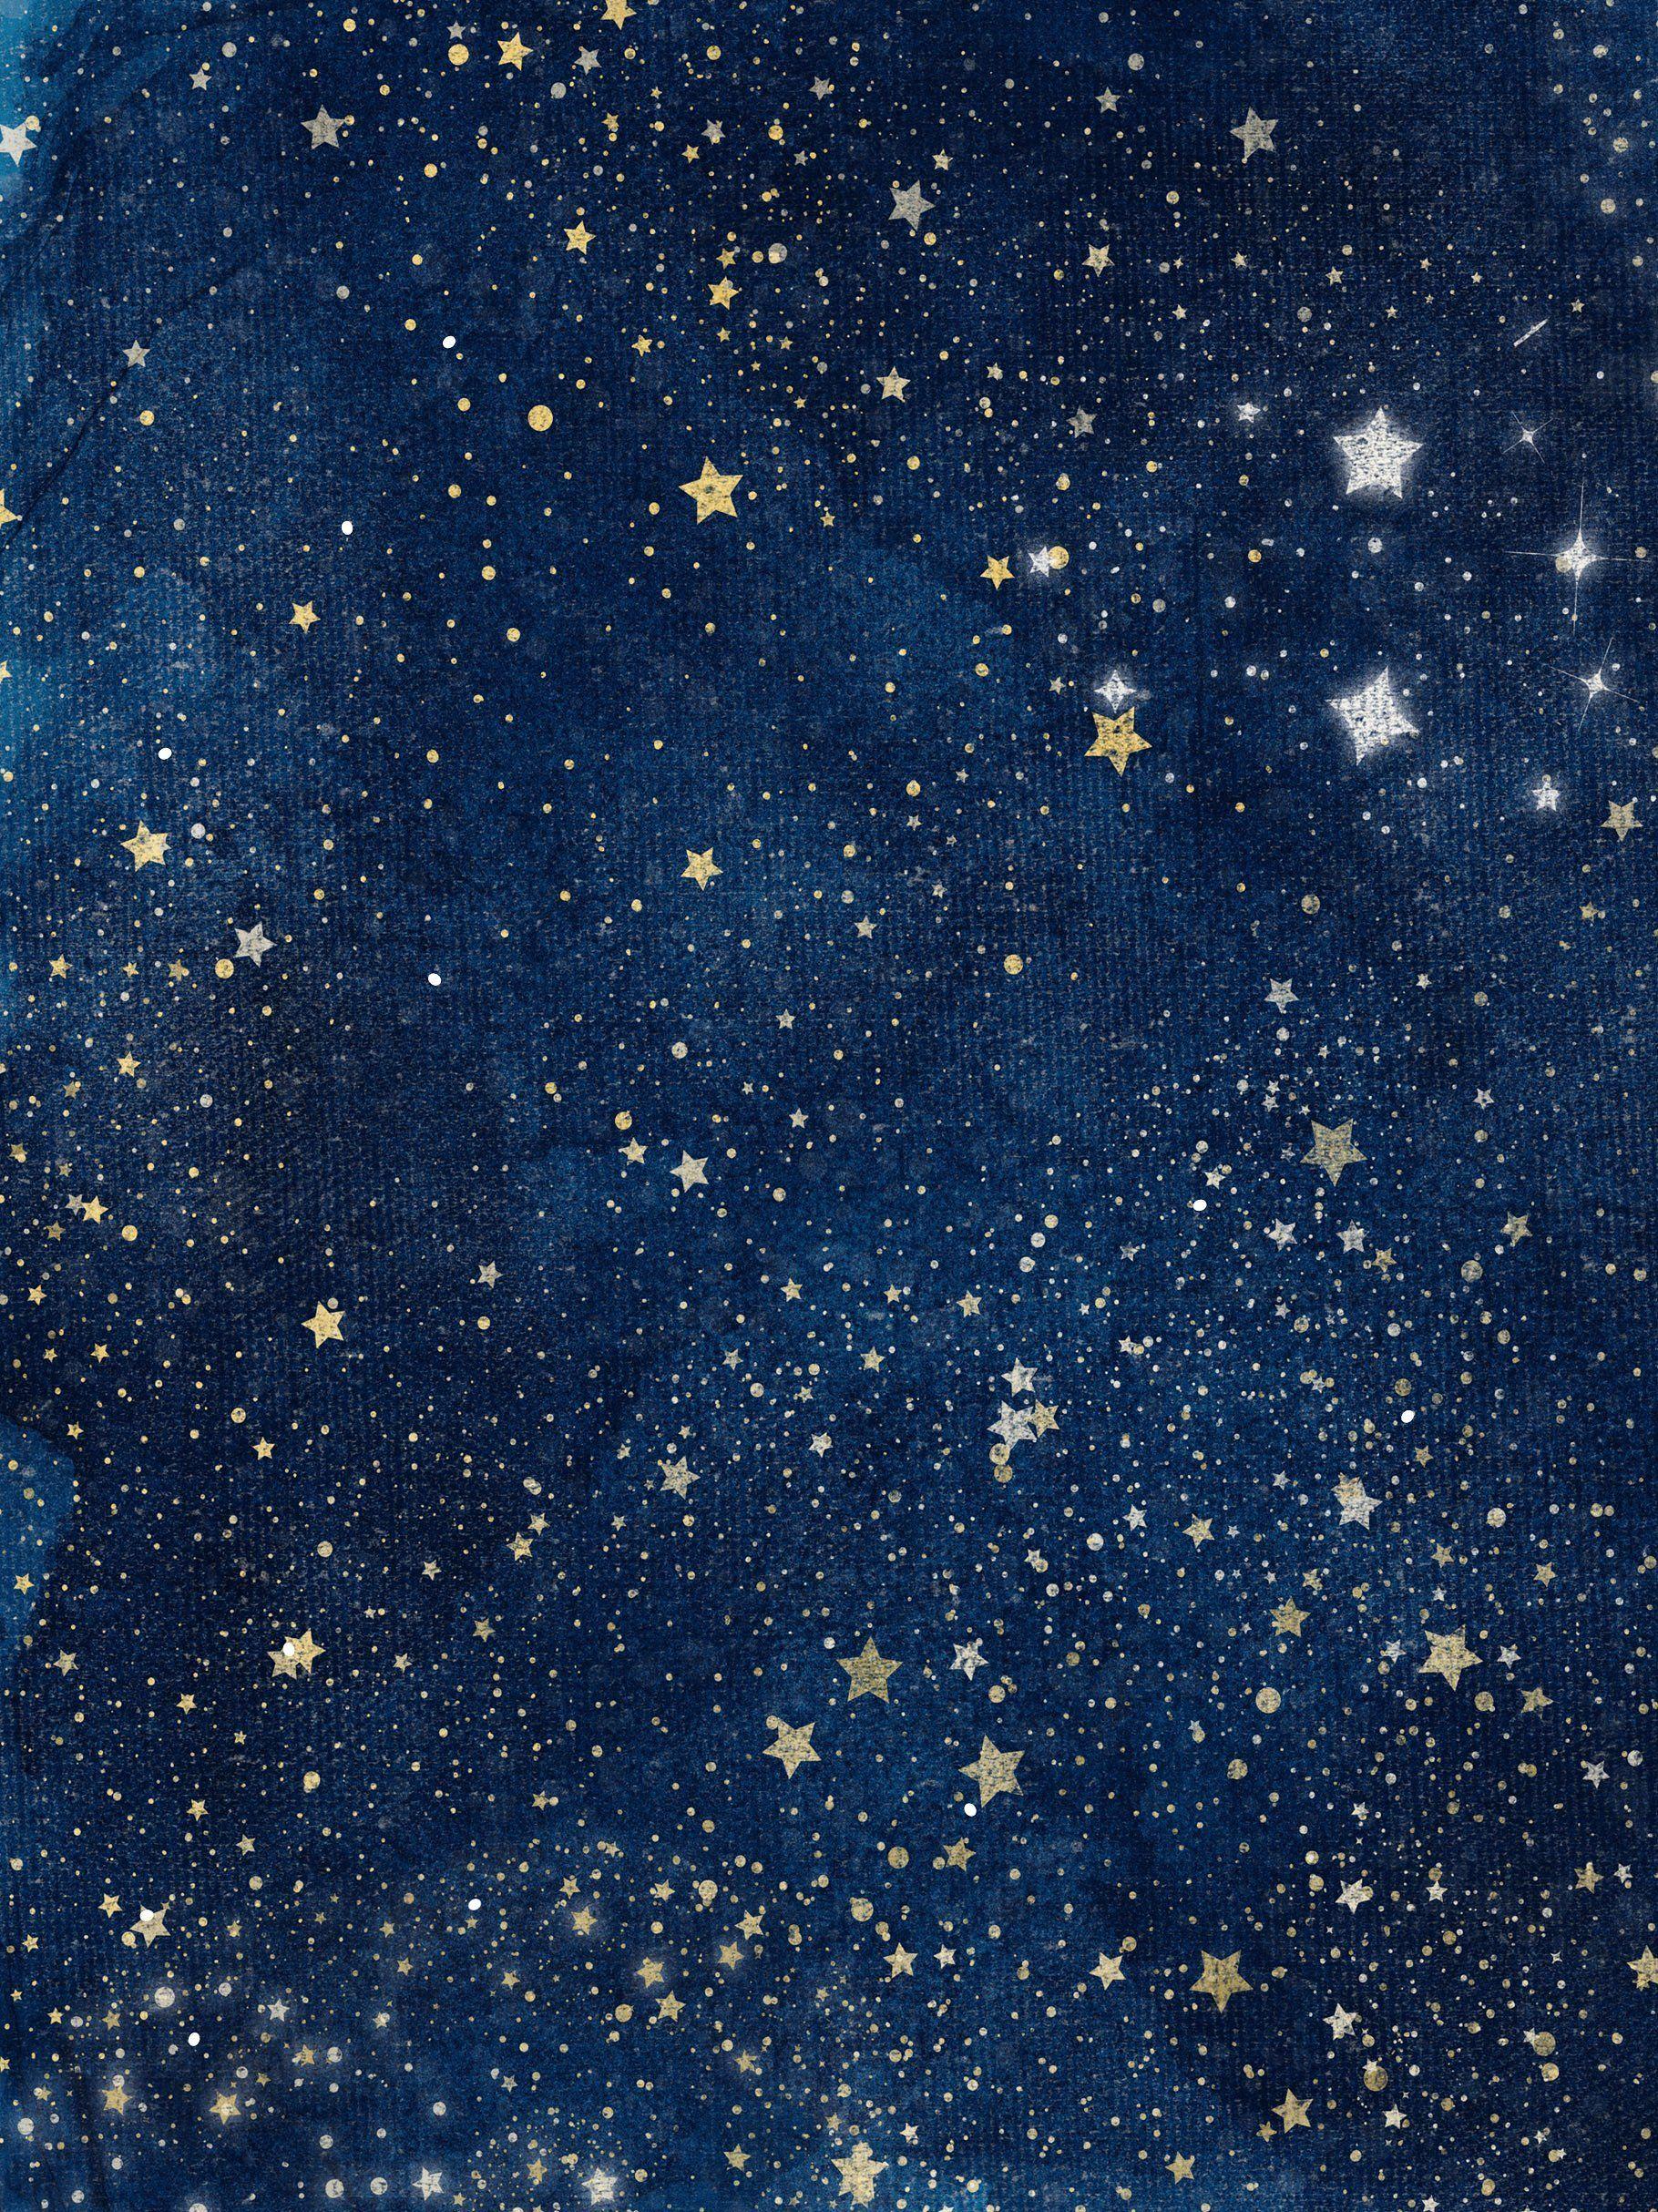 Starry Night Aesthetic Wallpapers - Top Free Starry Night Aesthetic